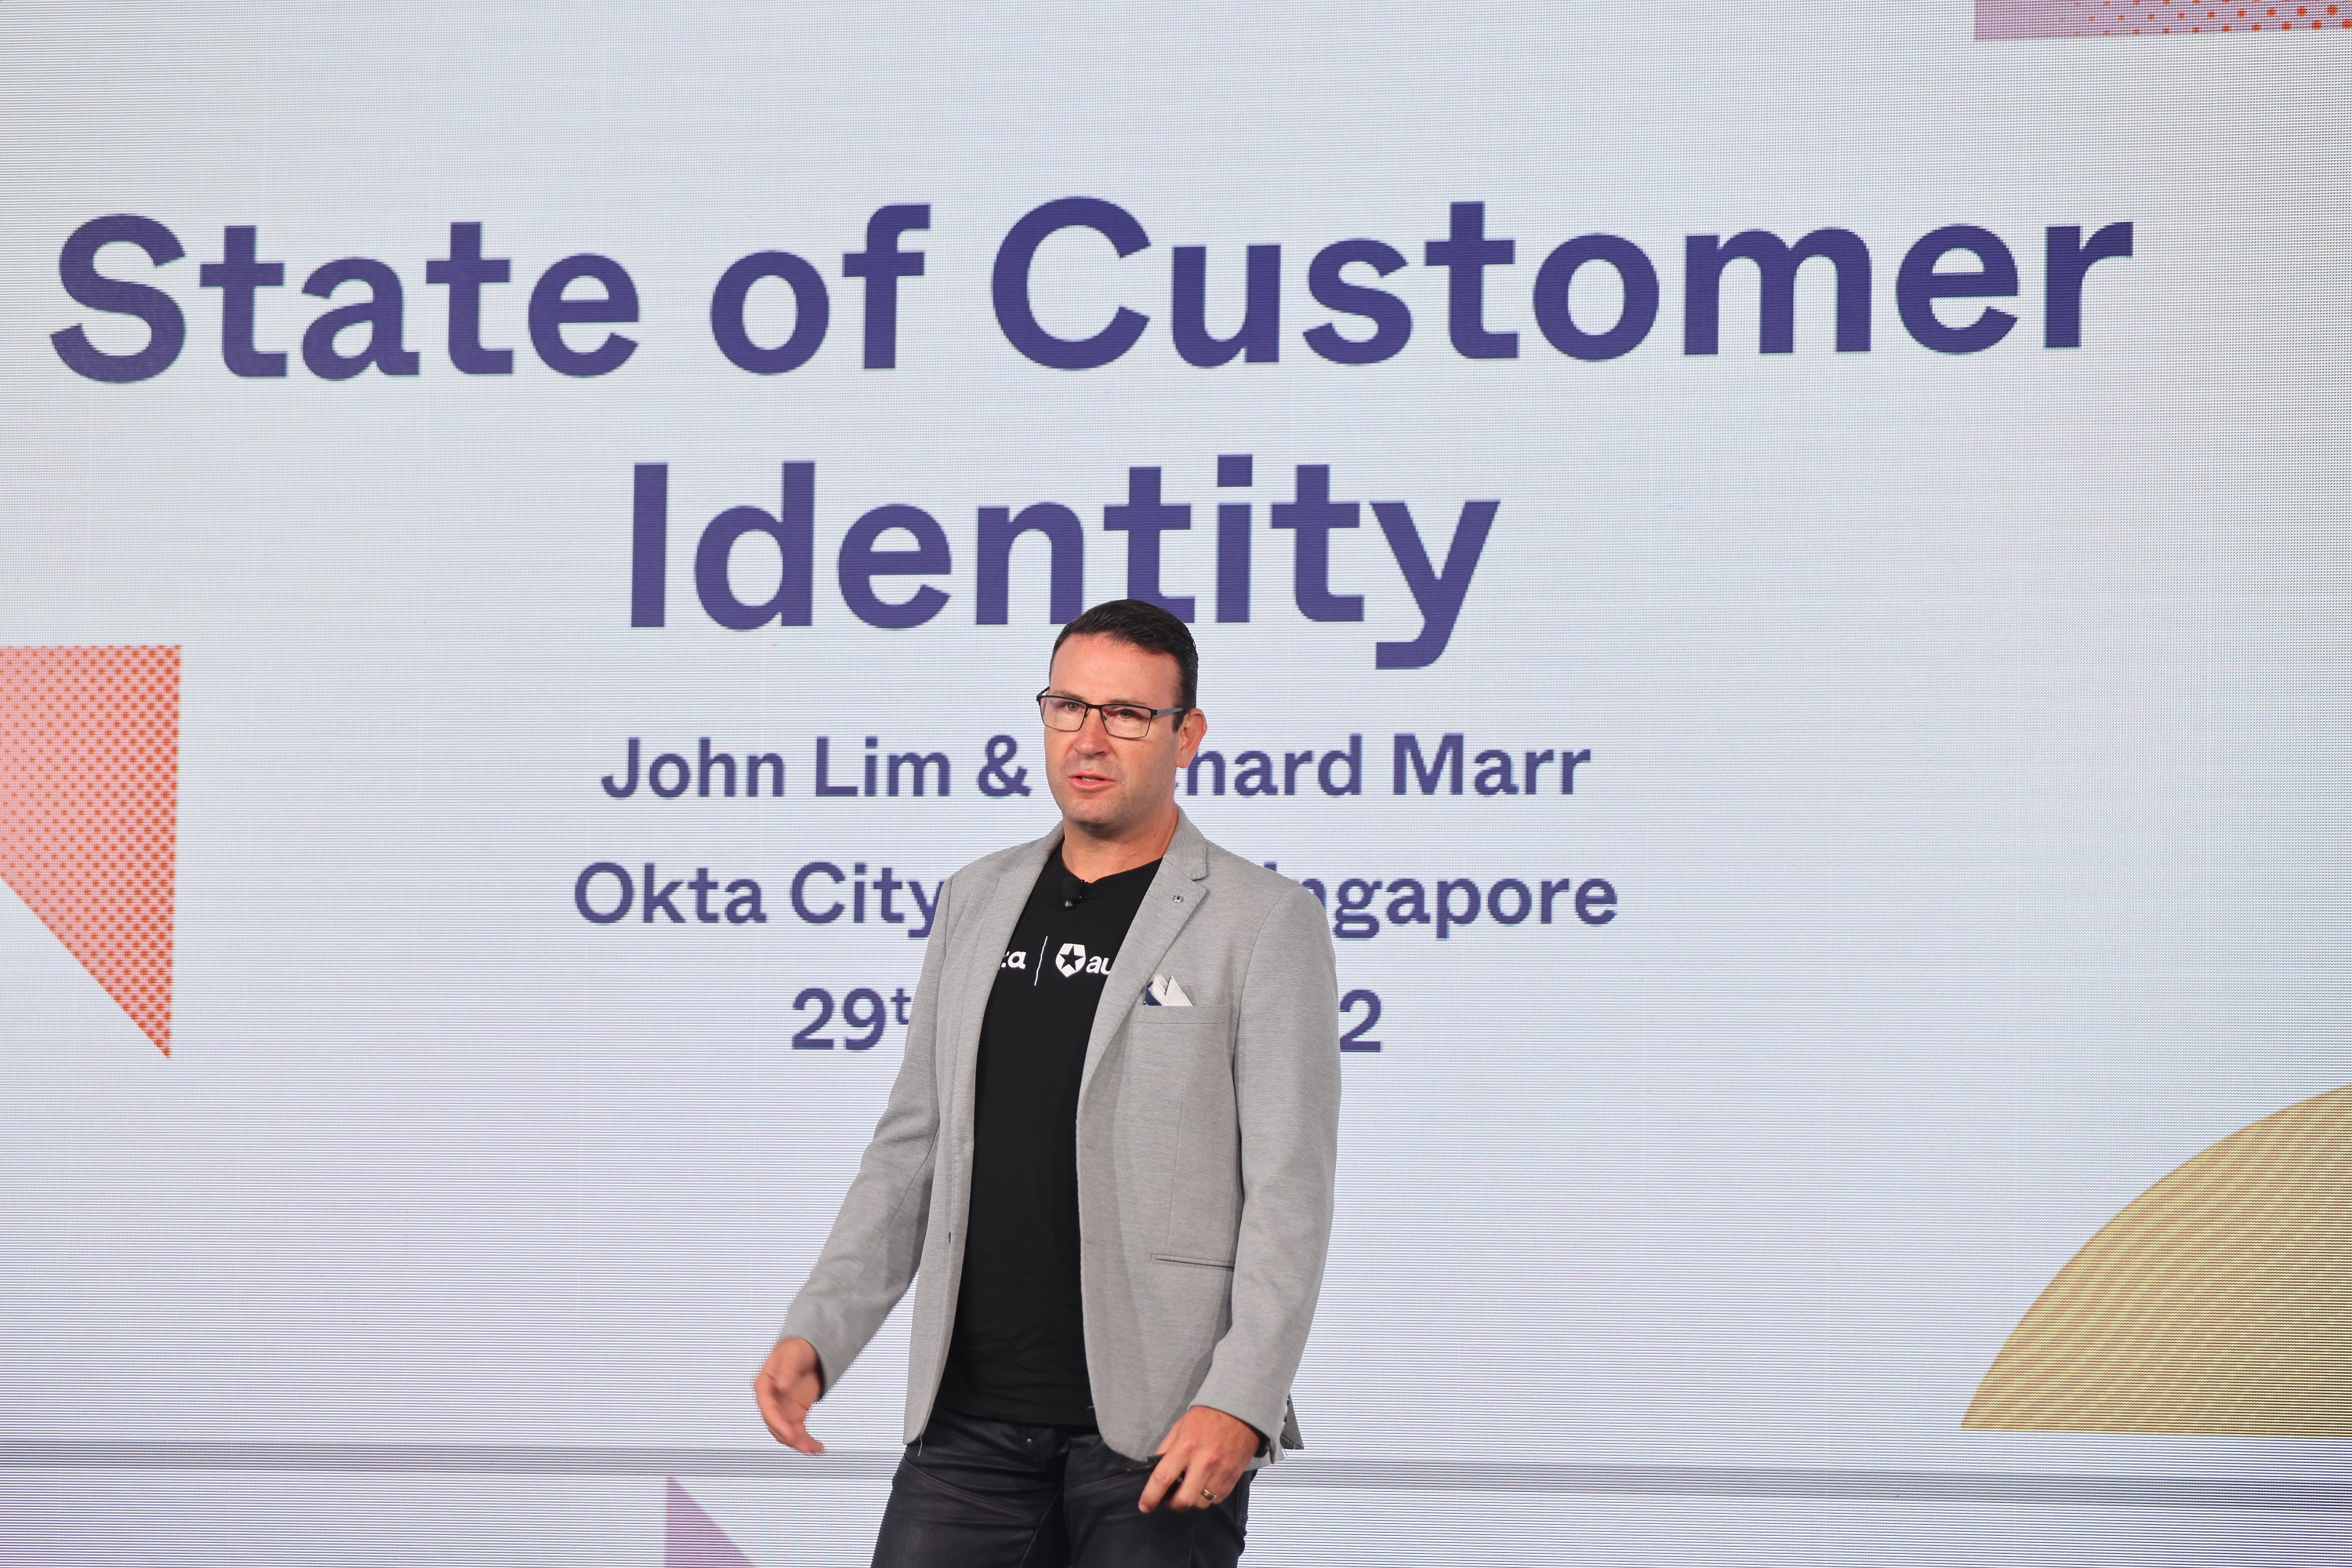 Okta Reveals Security as Top Concern Driving Adoption of Customer Identity & Access Management Solutions